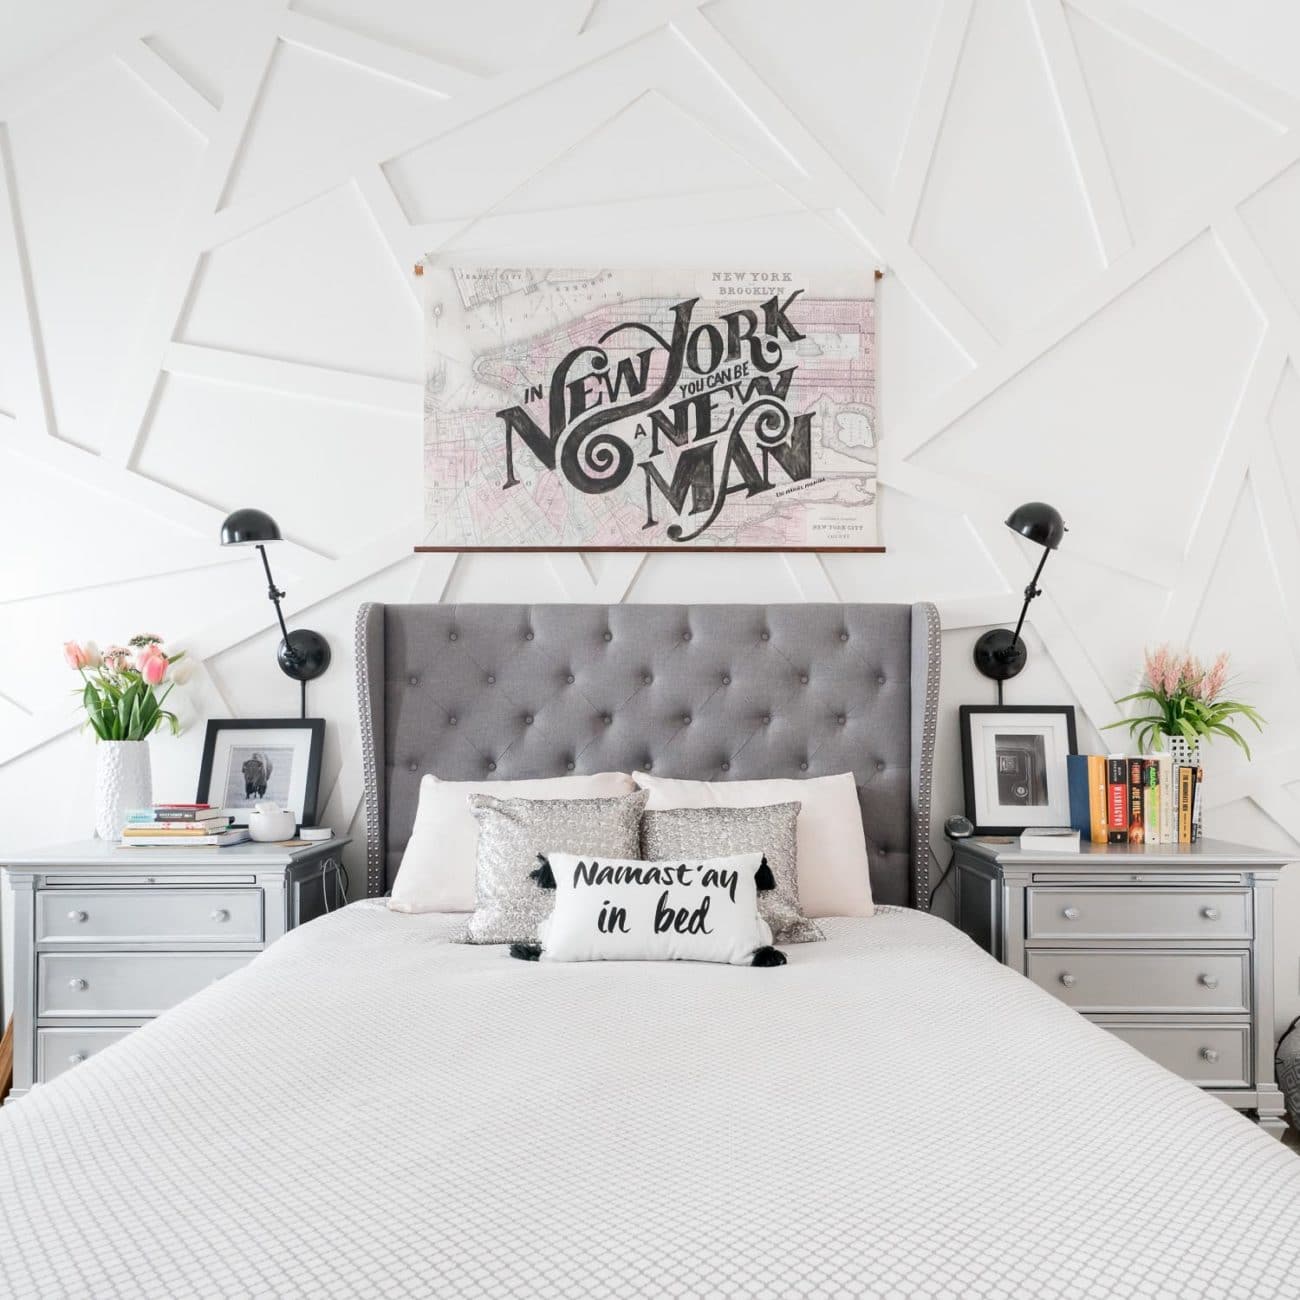 Modern bedroom with white geometric wall and silver nightstands with books